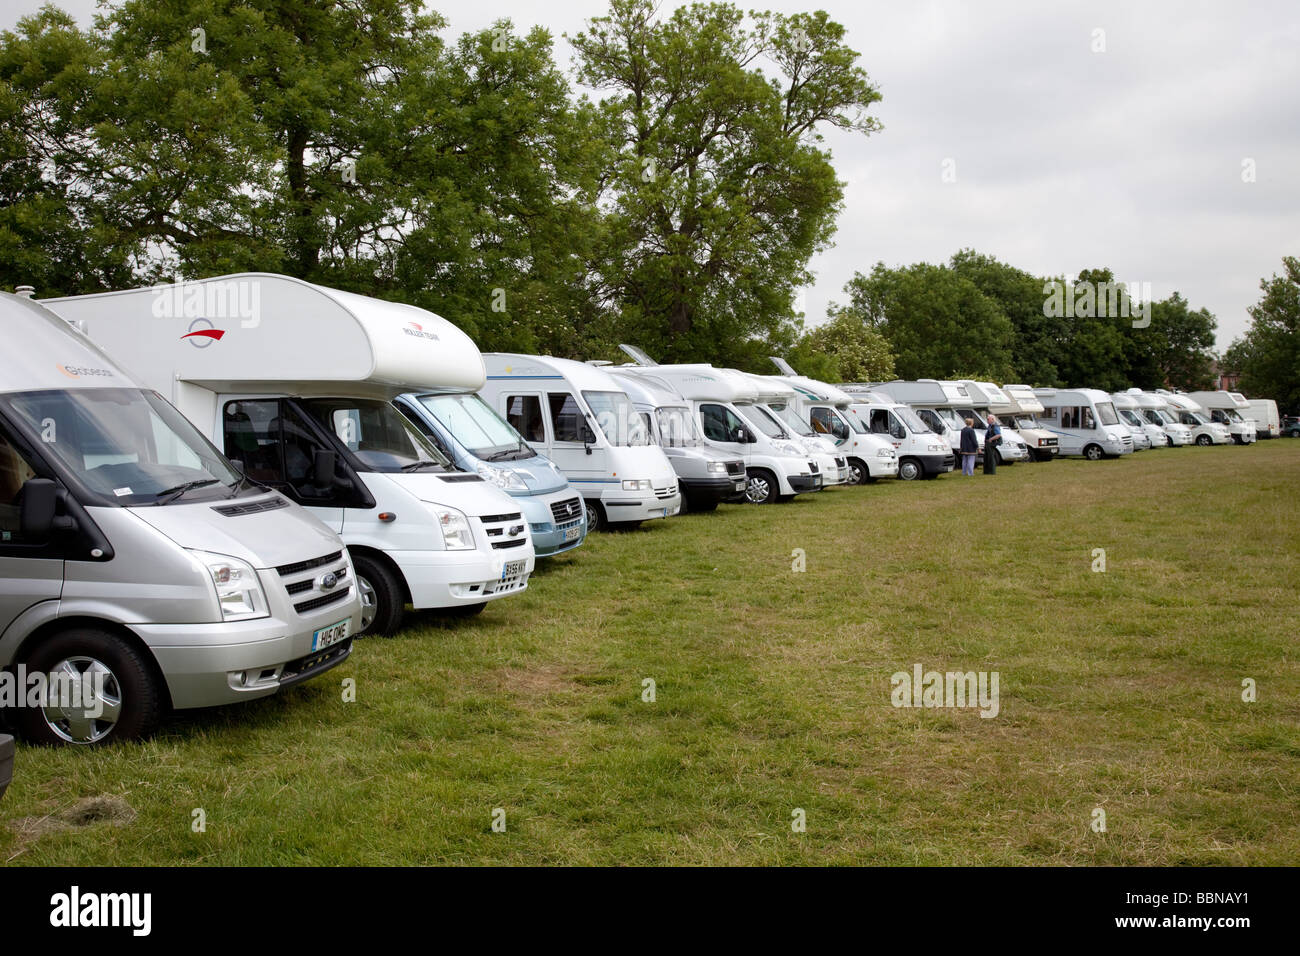 Long row of motorhomes parked in line Stratford upon Avon Racecourse UK Stock Photo